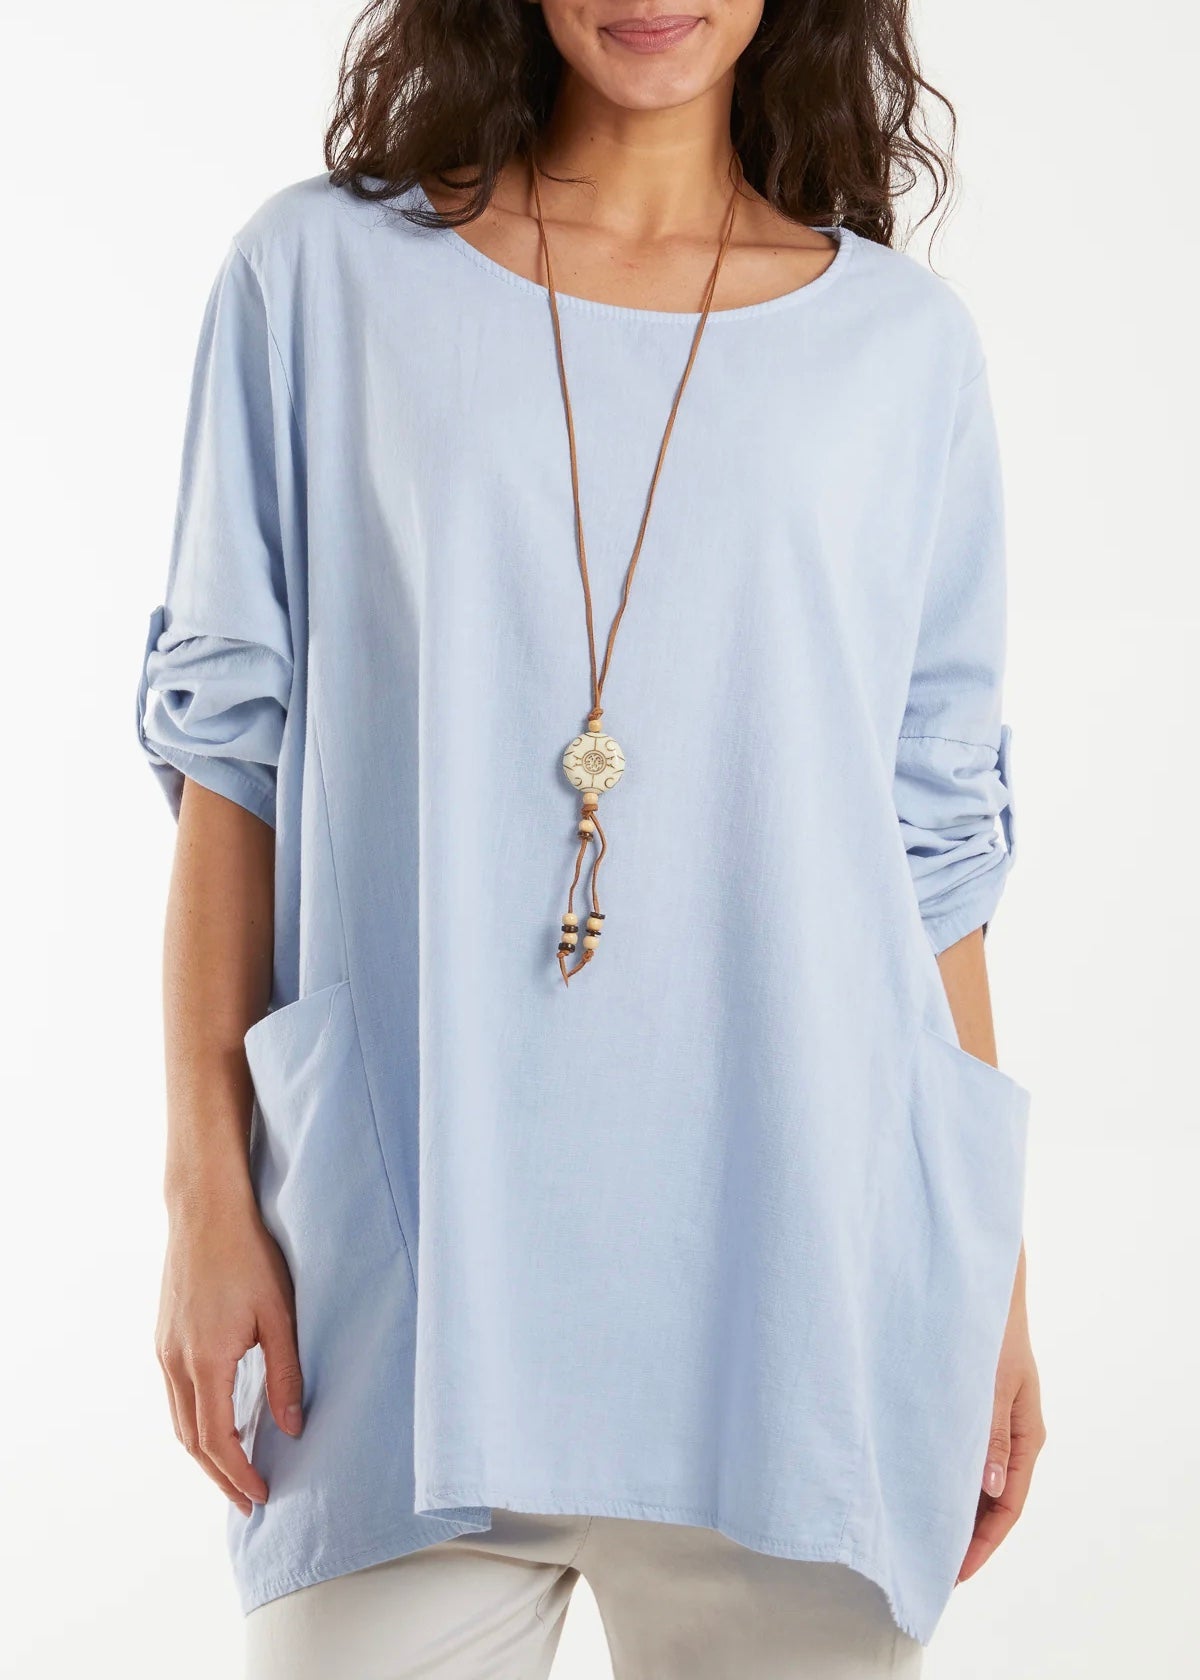 Sands - Relaxed Smock Top / Light Blue